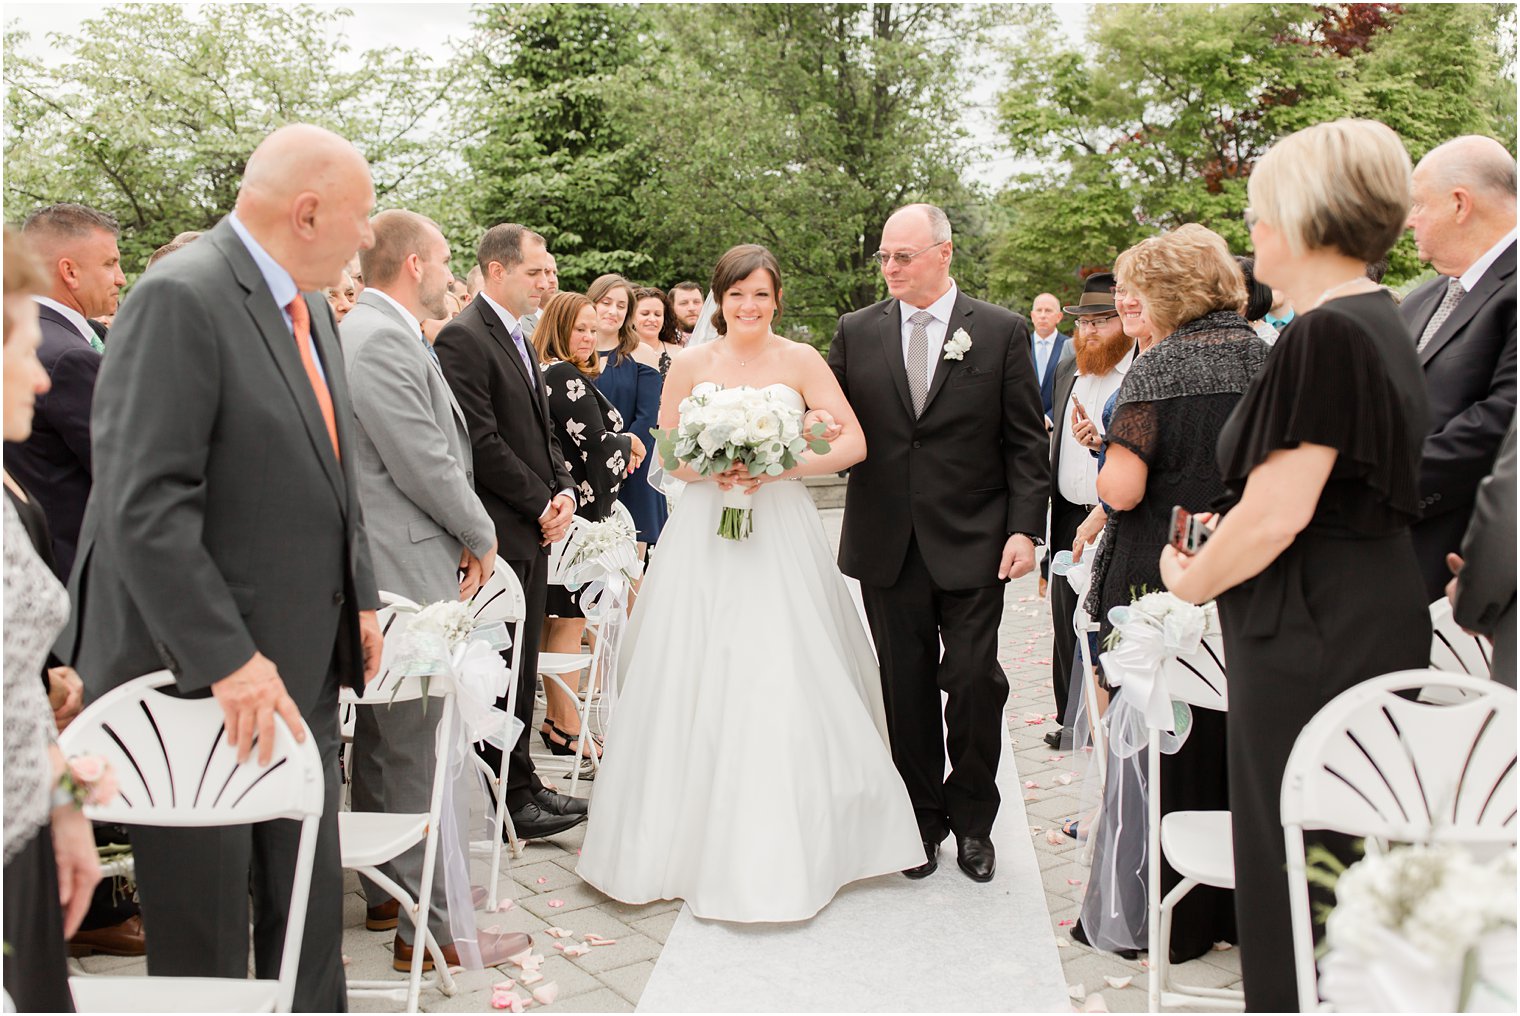 Bride walking down the aisle at Windows on the Water at Frogbridge in Millstone NJ